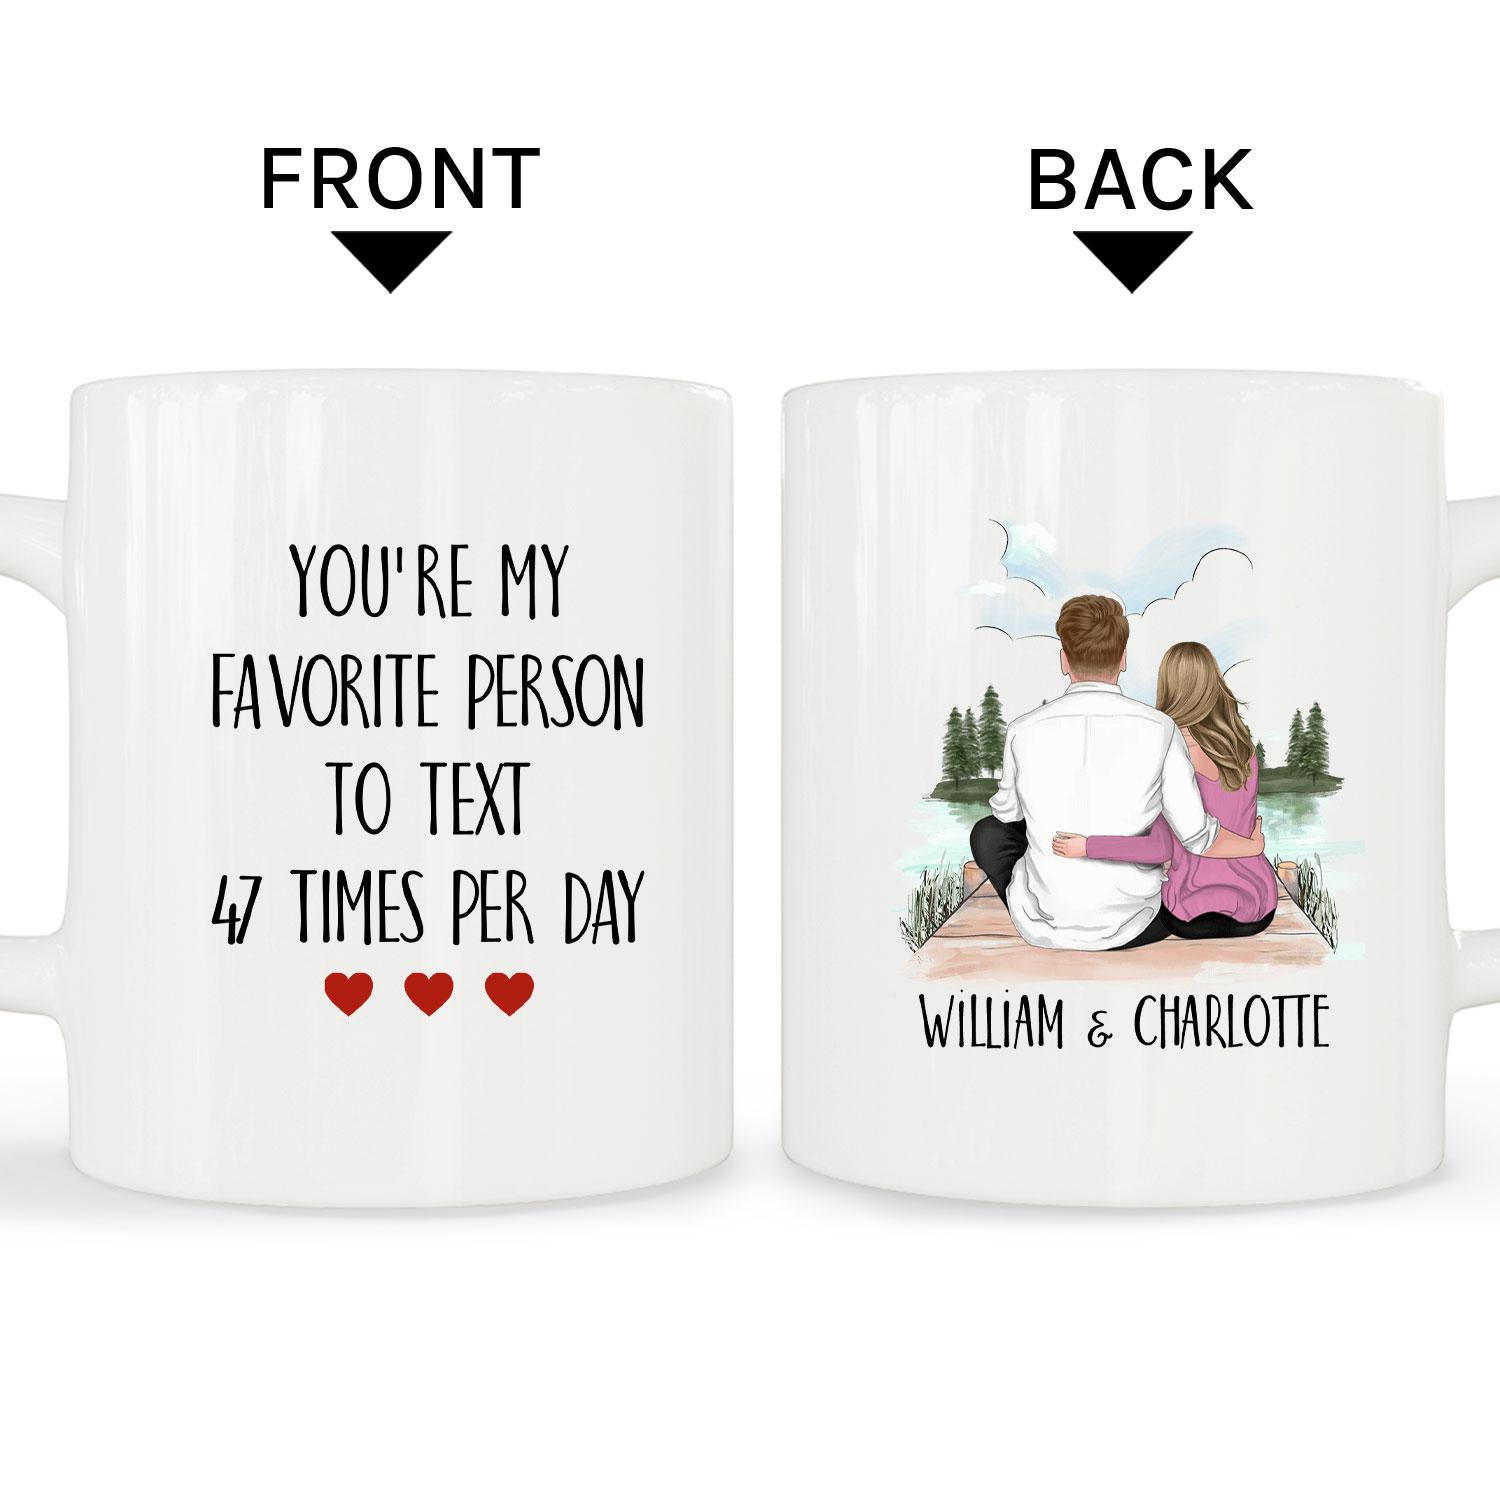 Personalized Gifts For Boyfriend  Unique Gifts For Boyfriend Online